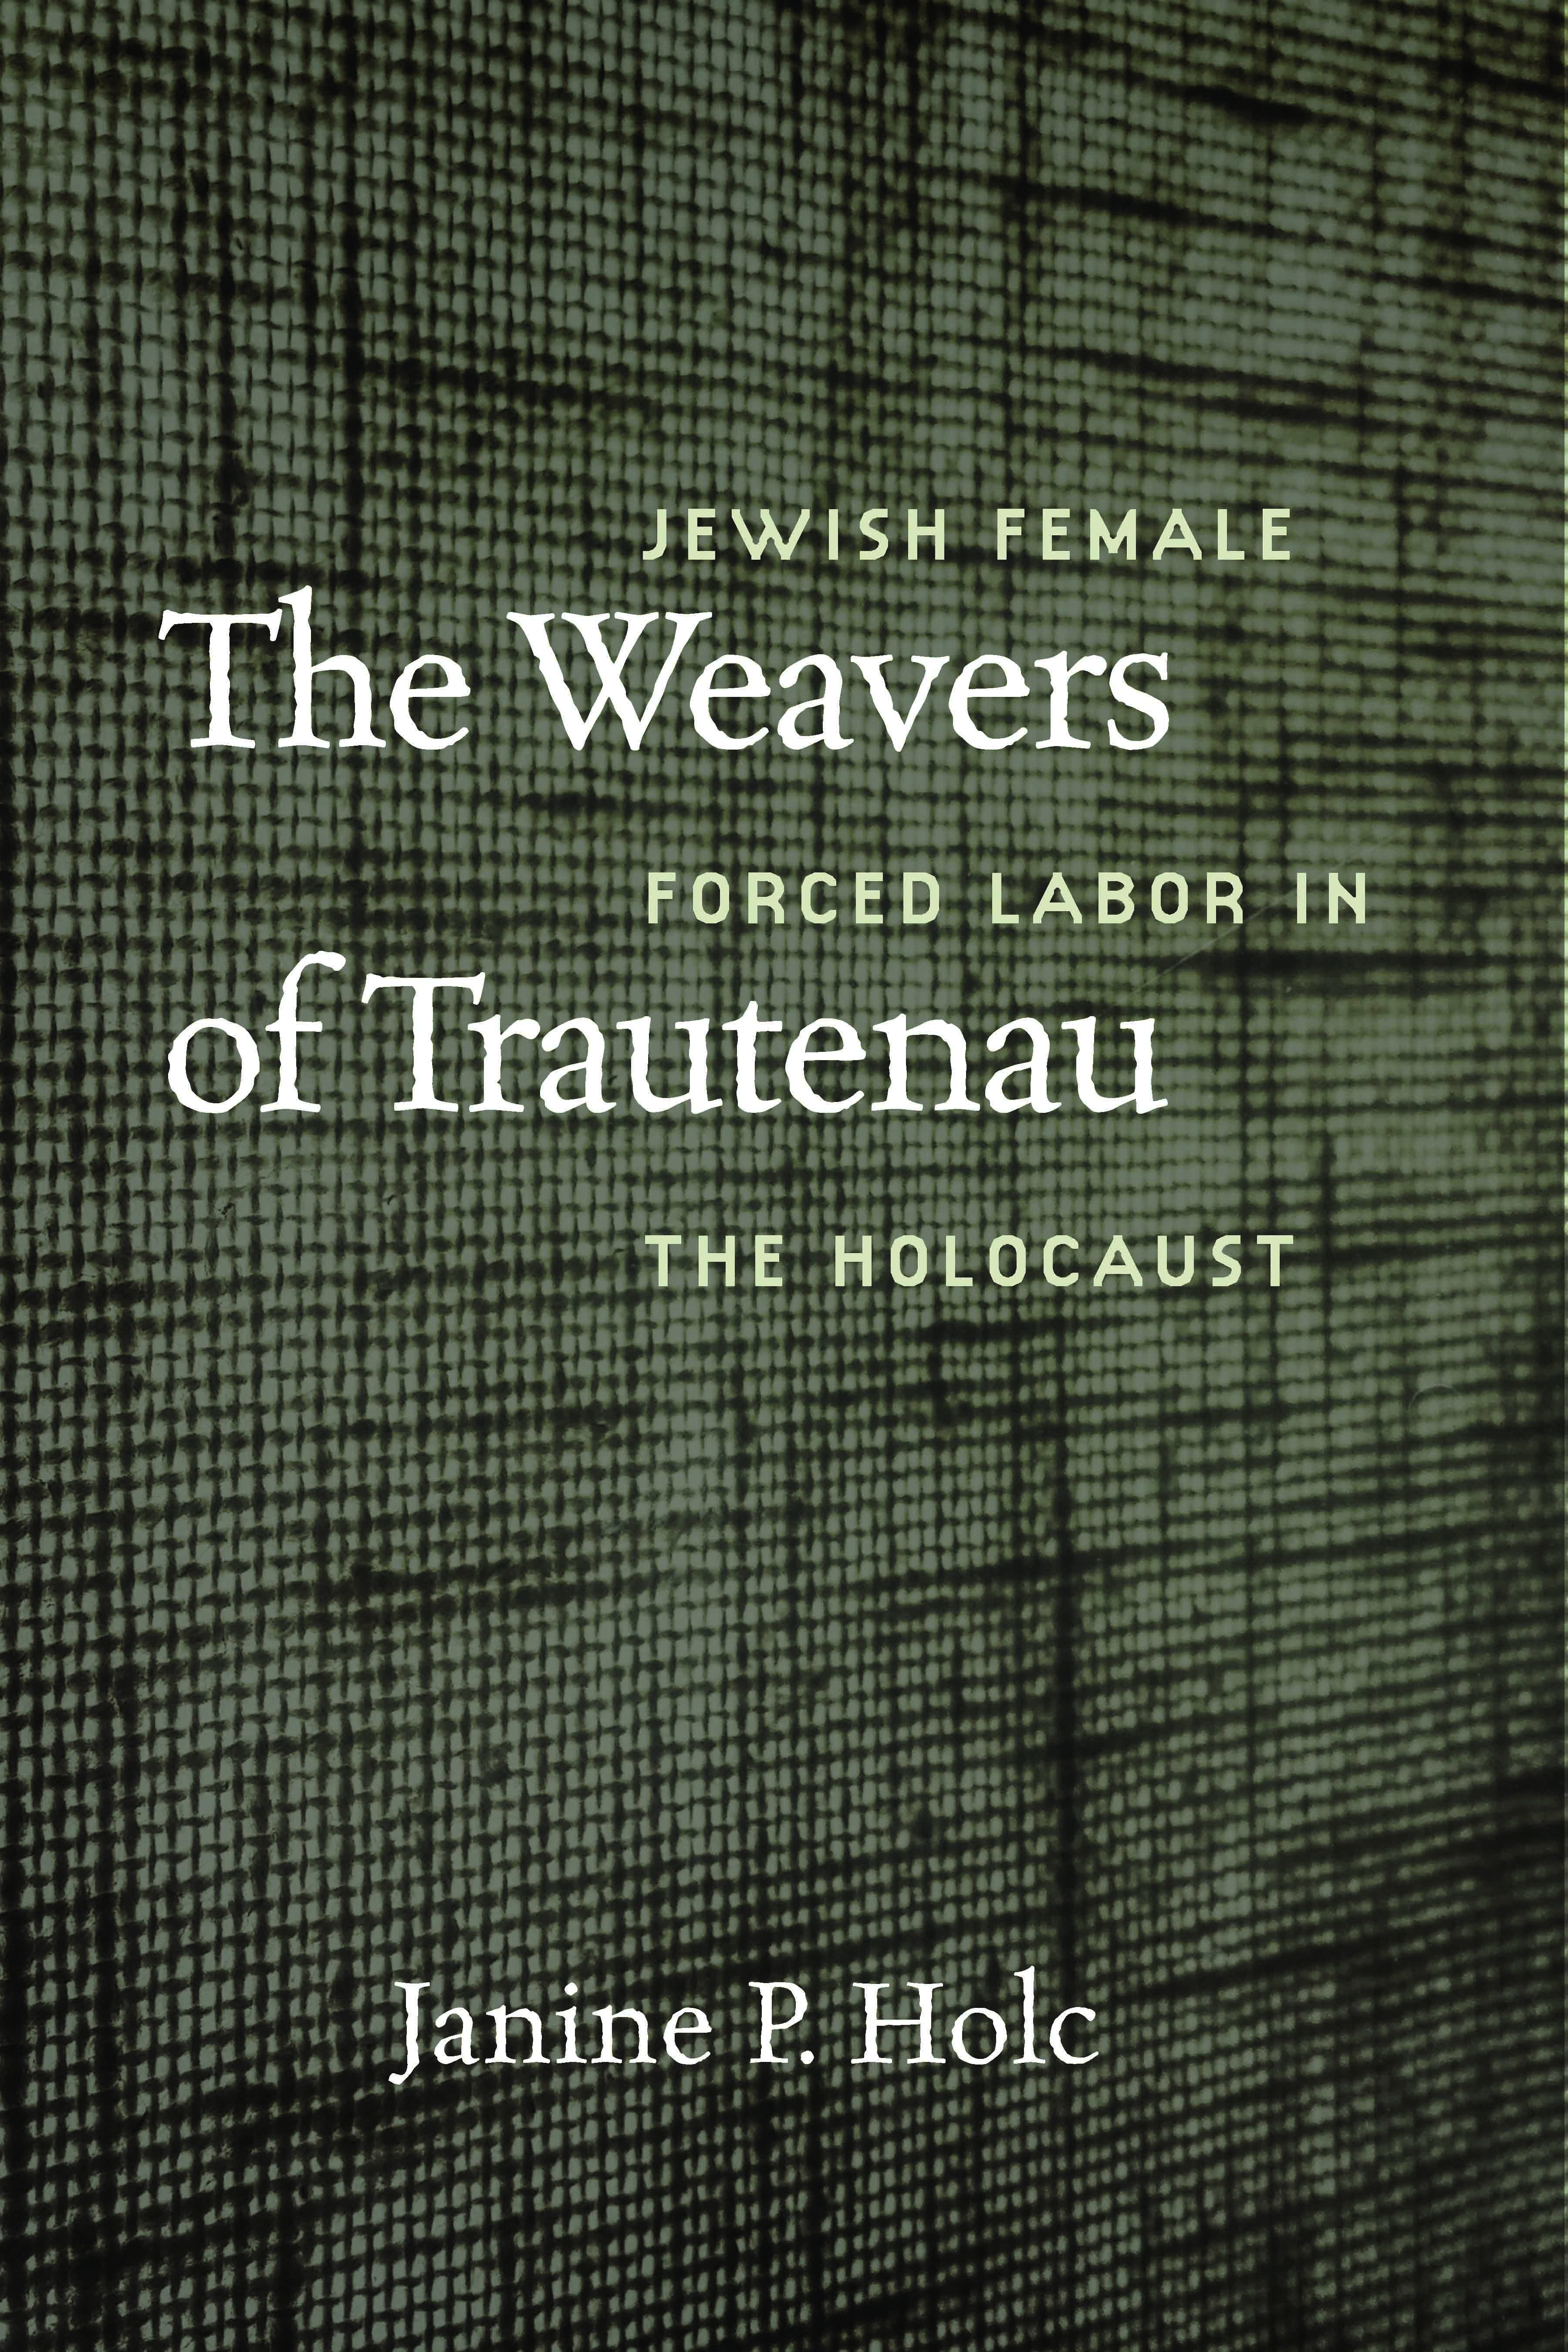 Green and black woven cover with the title of the book